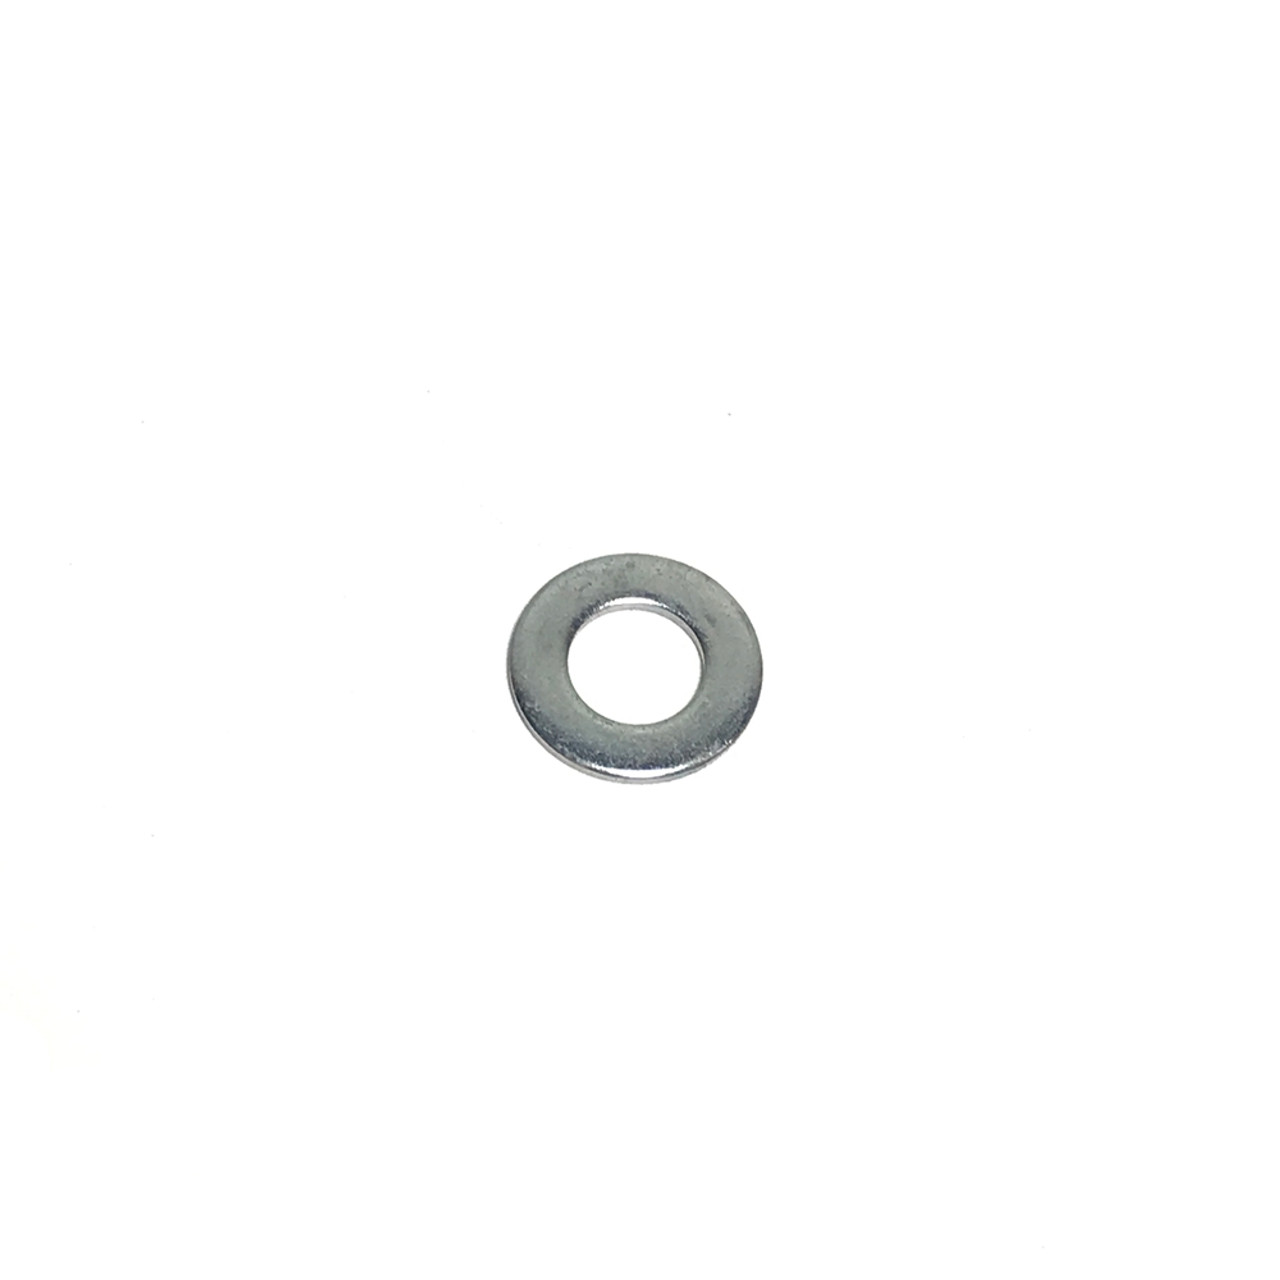 PLATED FLATWASHER 125, 14MM